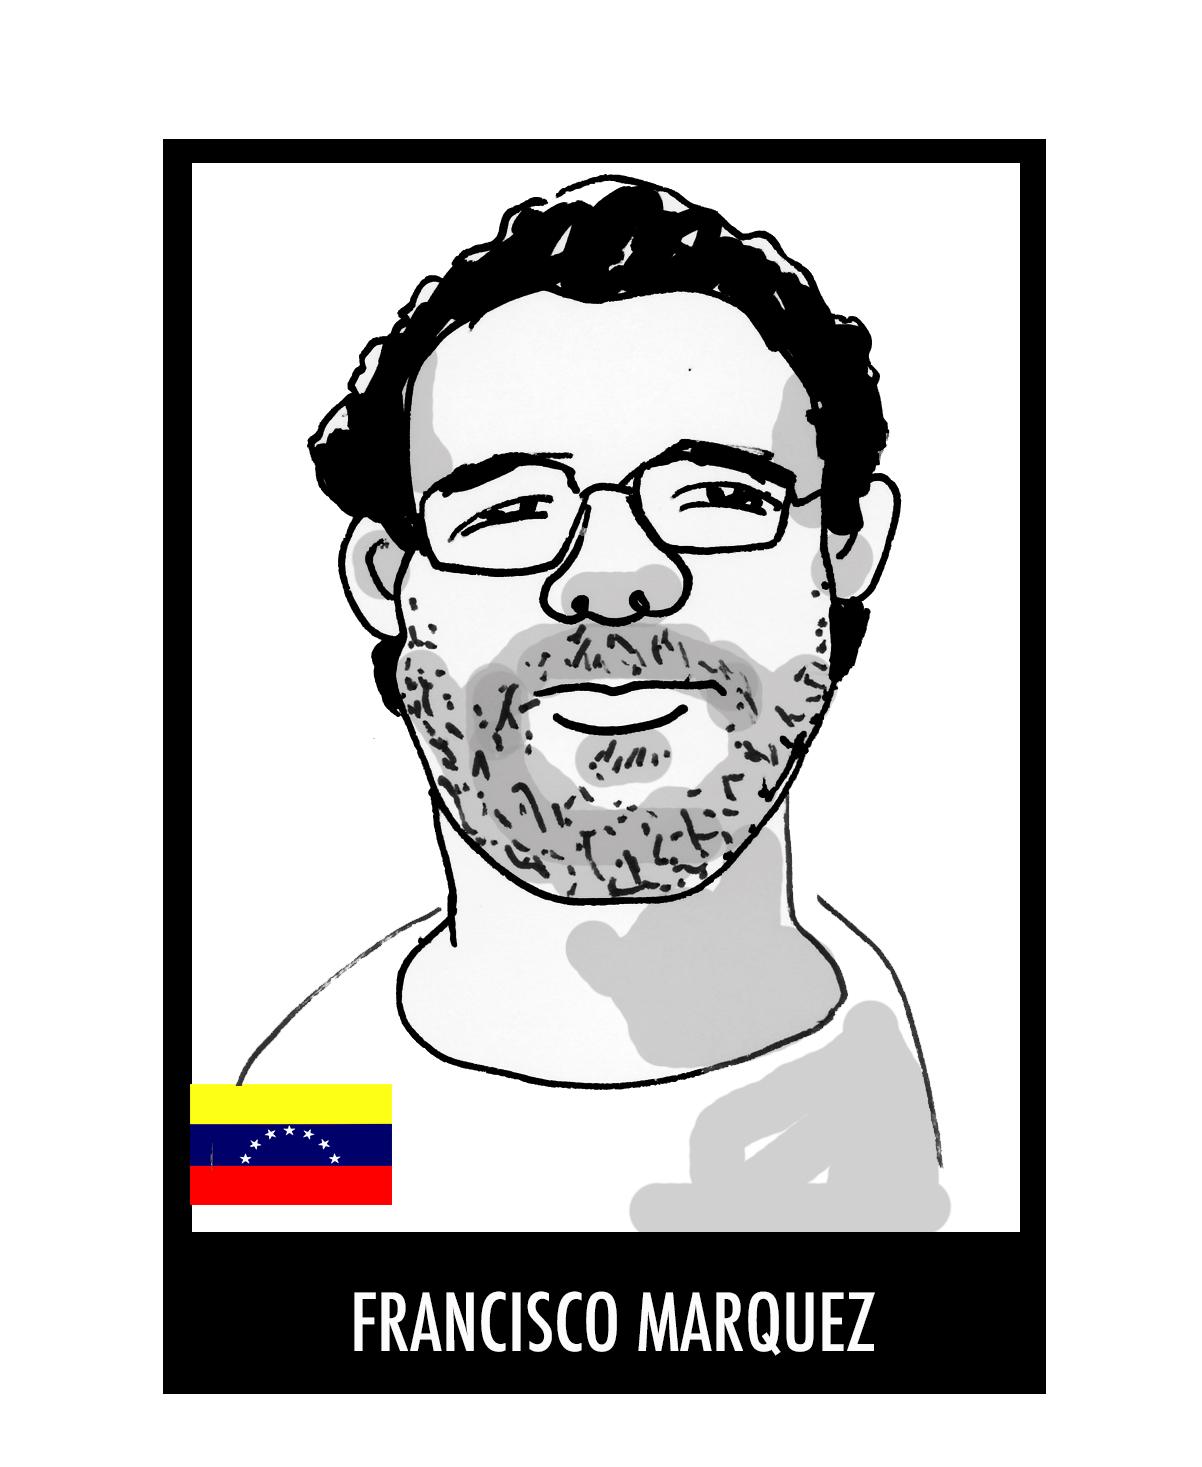 A drawing of Francisco Marquez by cartoonist Rayma Suprani (done before Marquez' release) as part of an effort to draw attention to the plight of political prisoners in Venezuela.